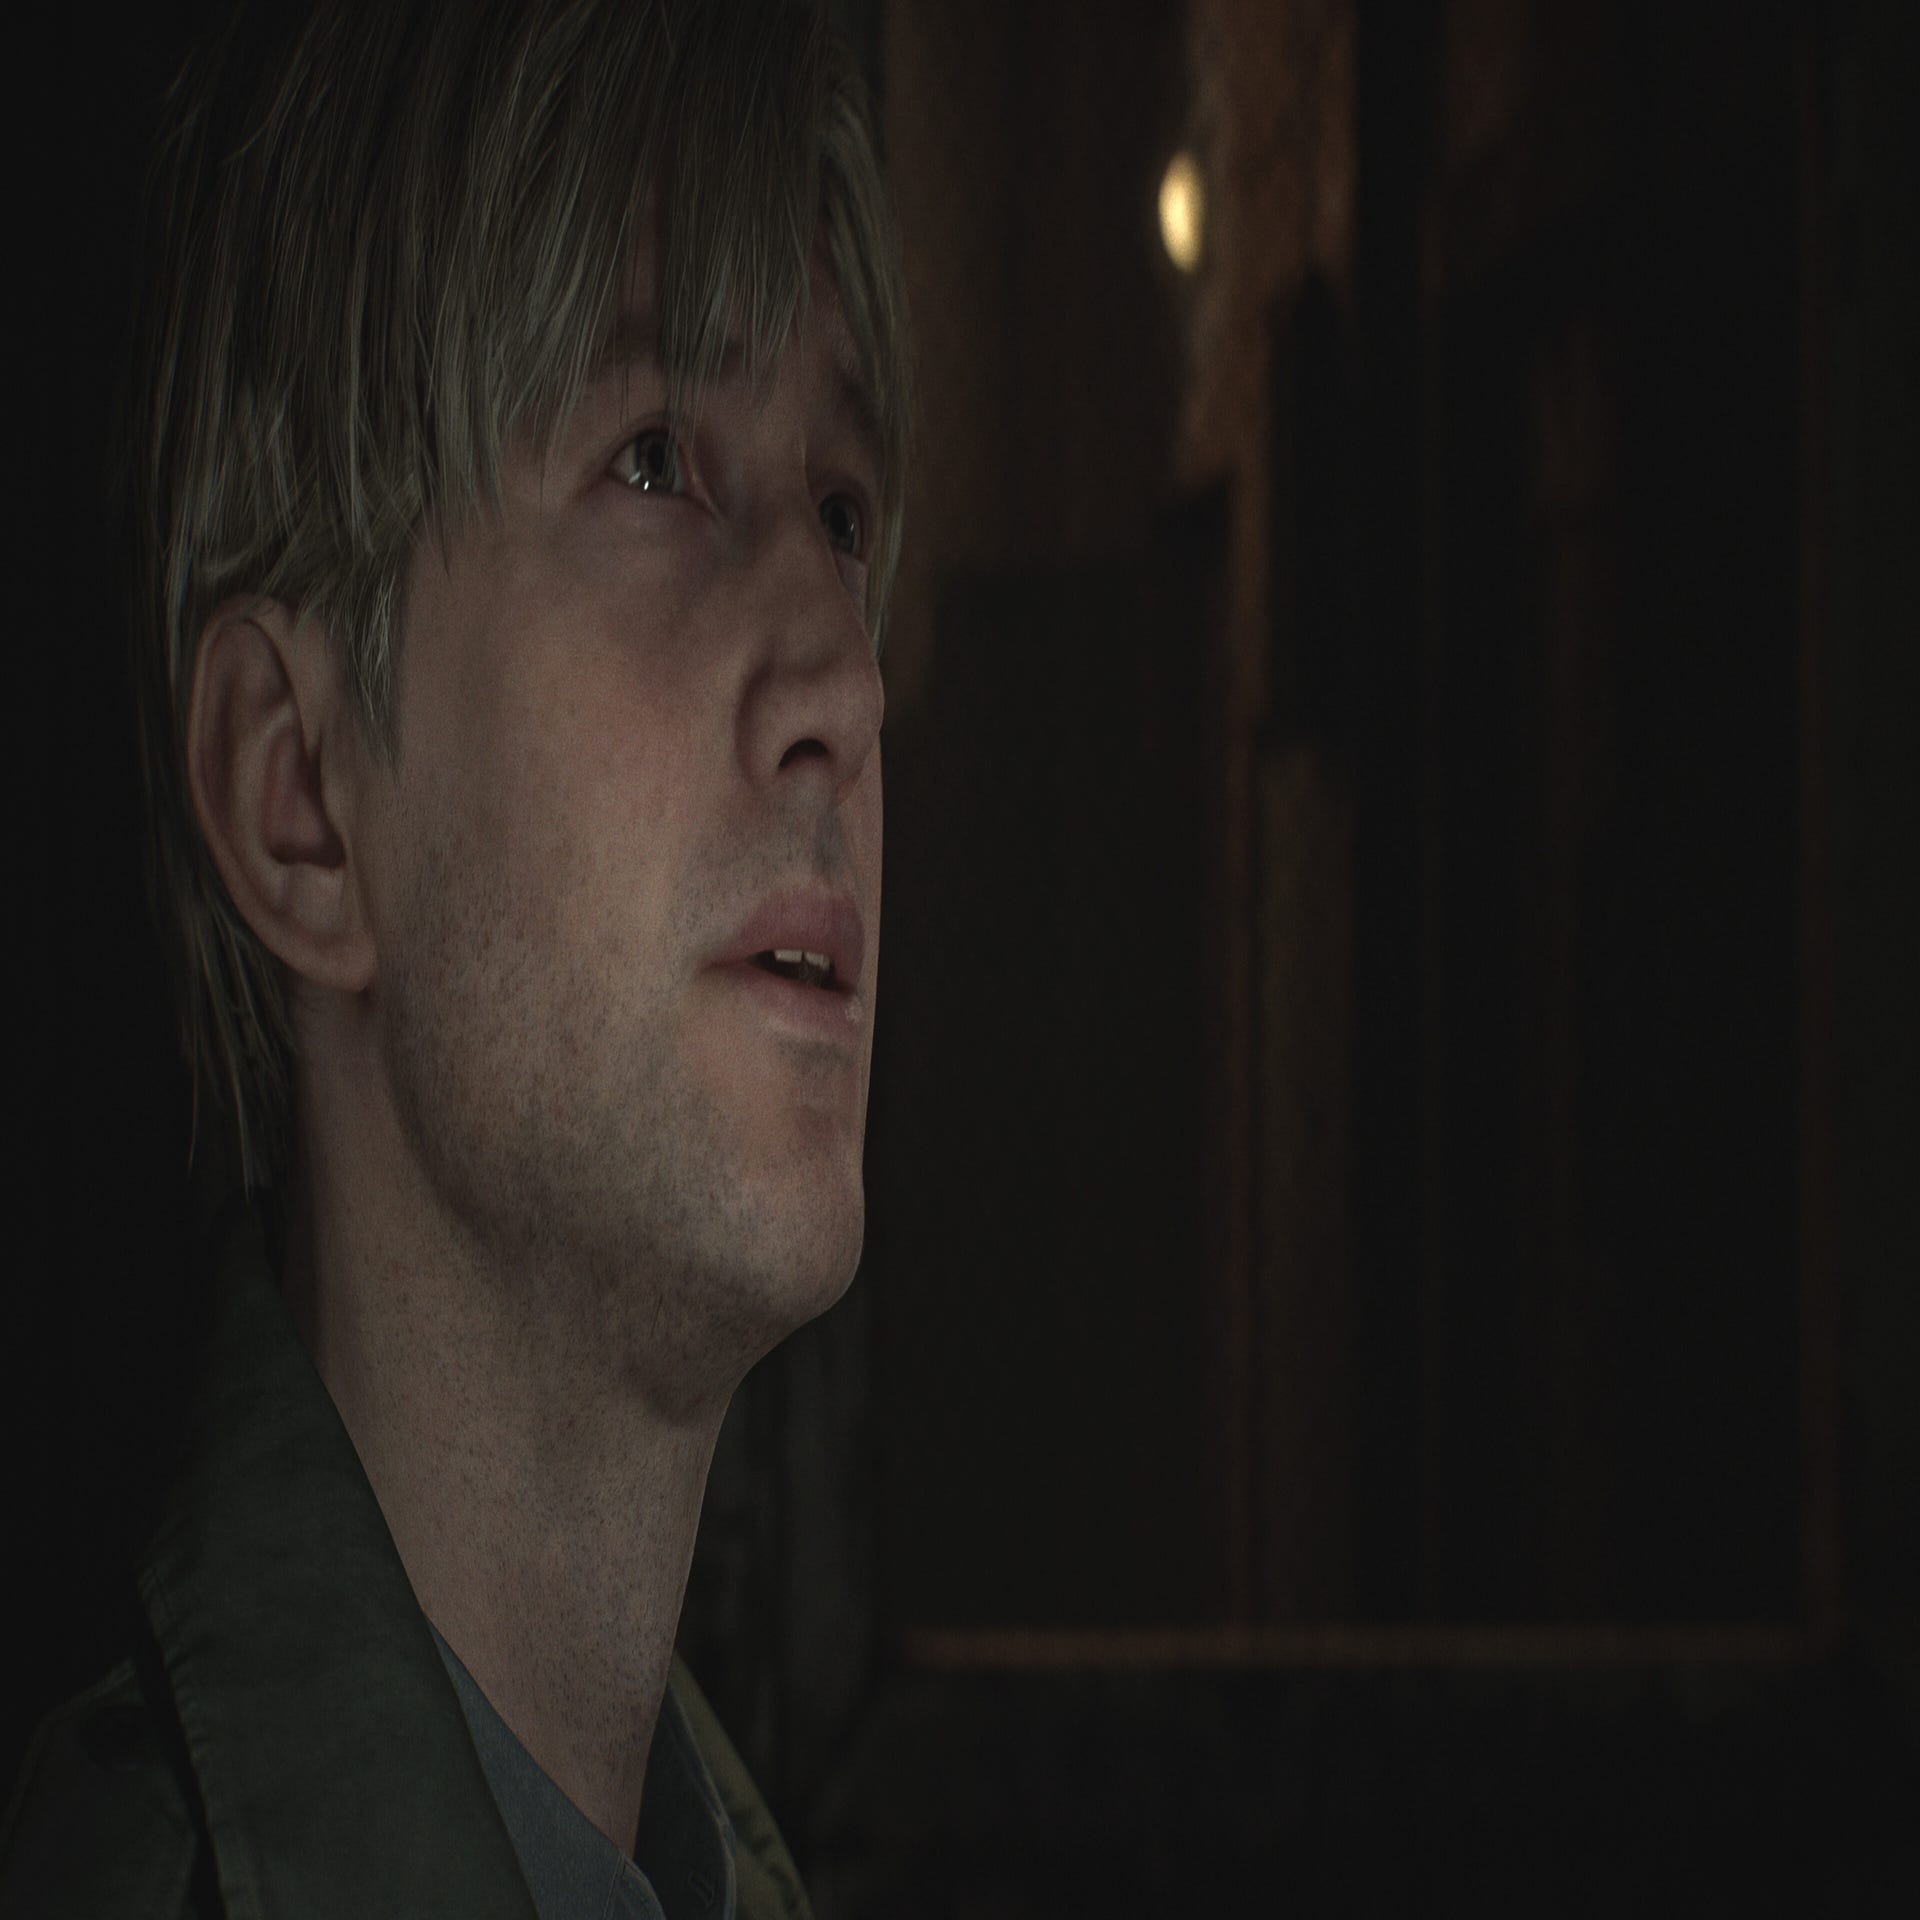 We watched the 13 minutes of Silent Hill 2 remake gameplay and it looks...OK